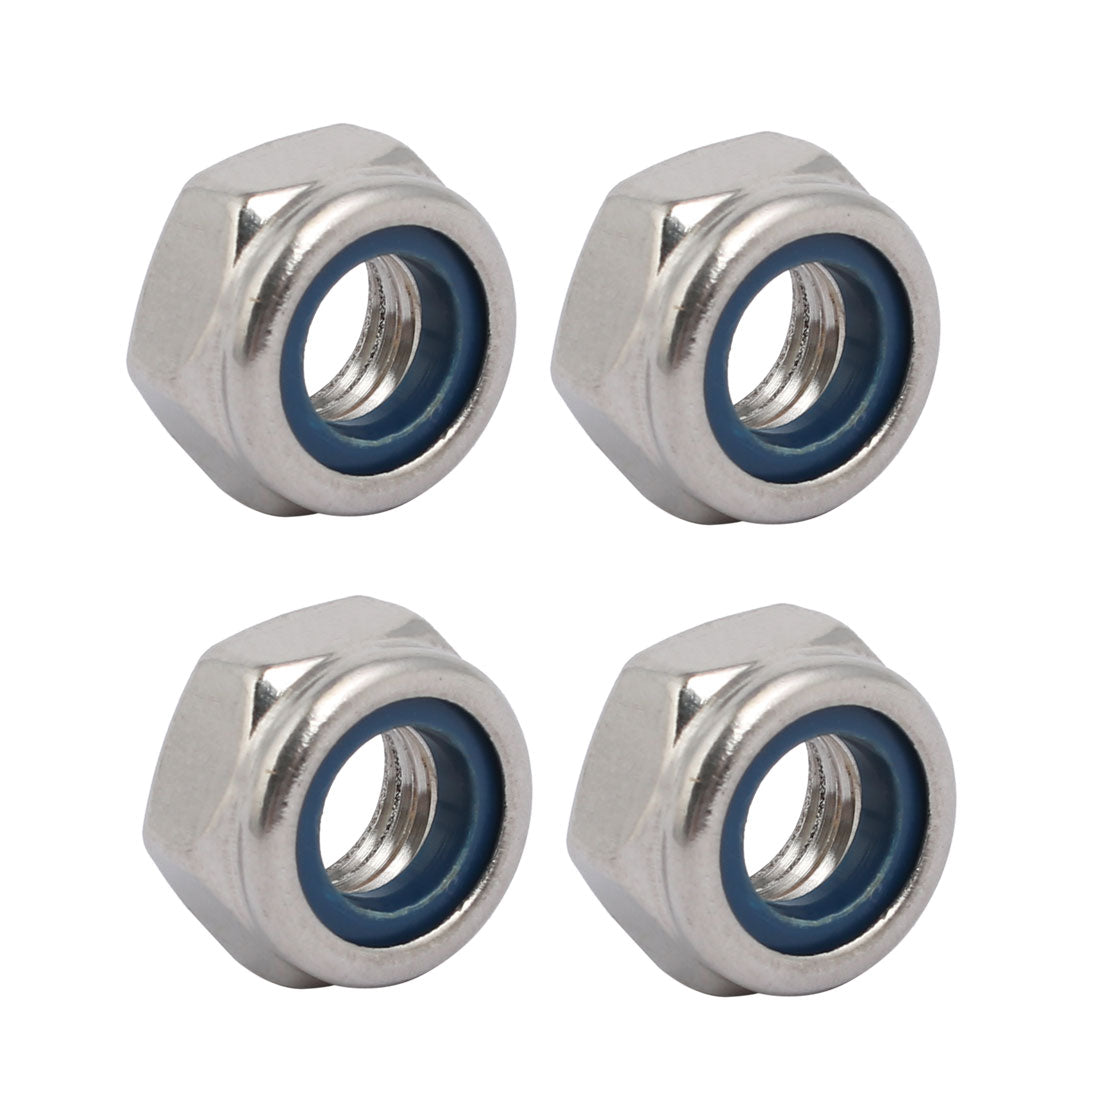 uxcell Uxcell 4pcs M10 x 1.5mm Pitch Metric Thread 304 Stainless Steel Left Hand Lock Nuts